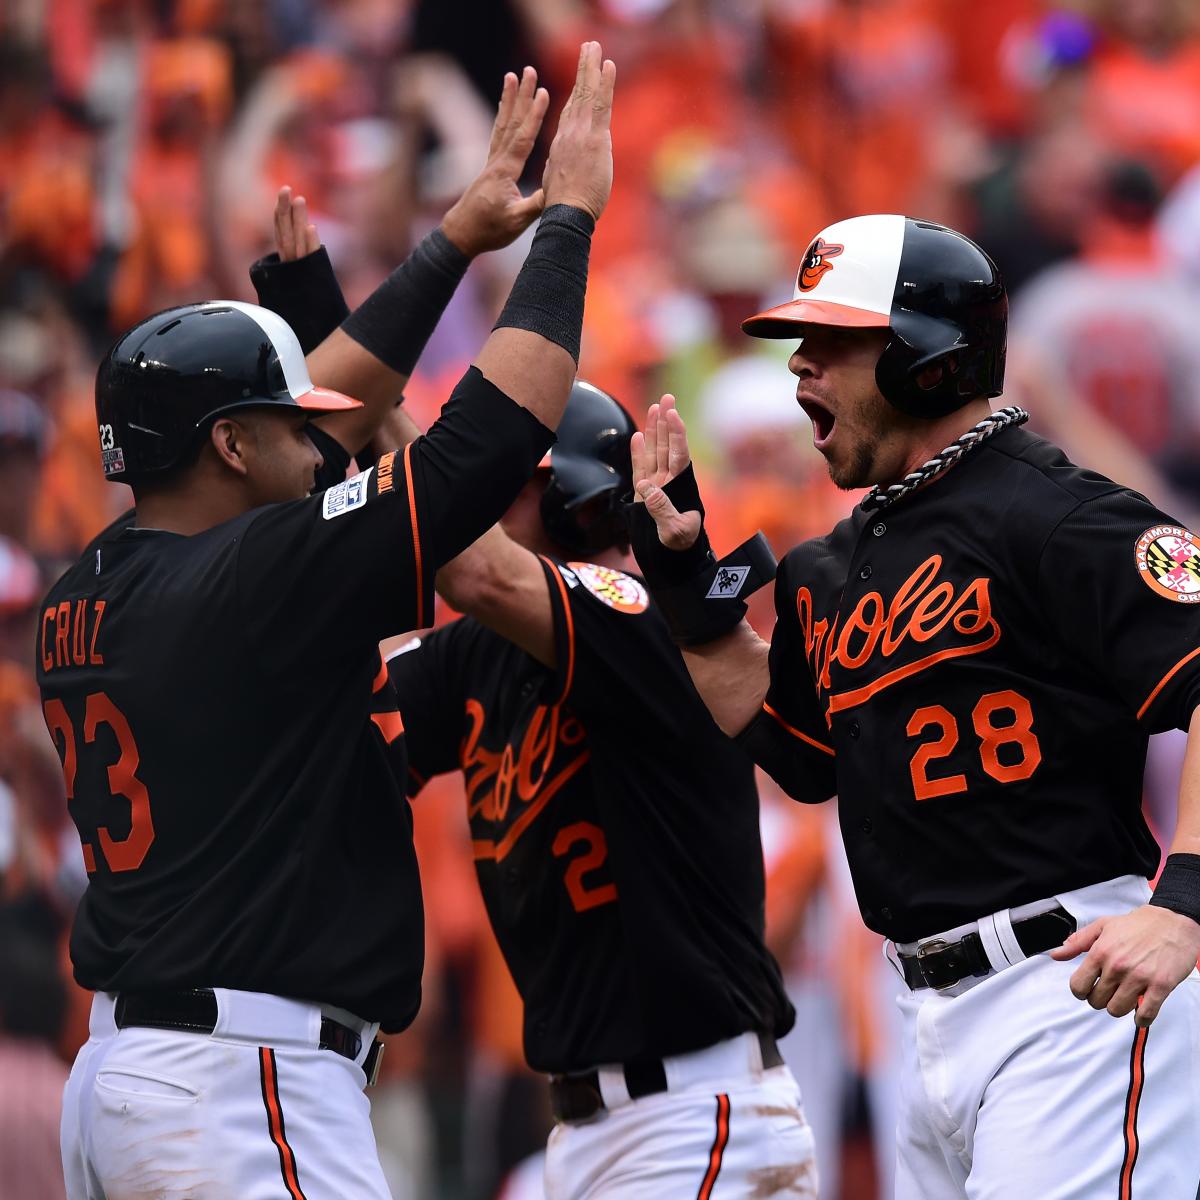 Orioles vs. Tigers Game 3 Time, TV Info, Live Stream and More News